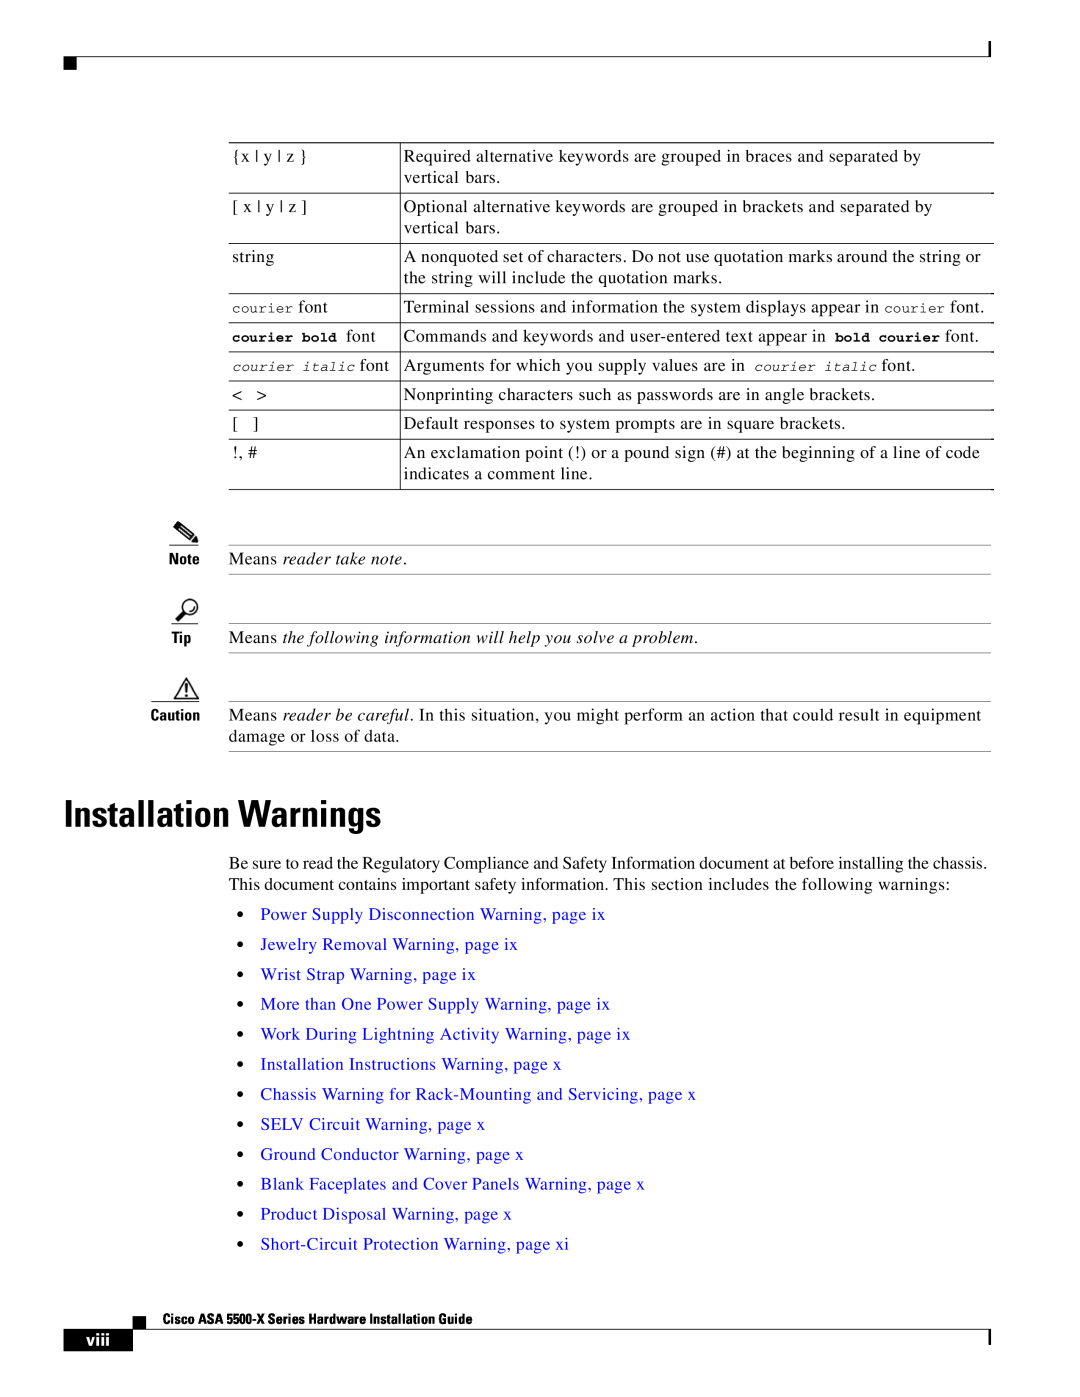 Cisco Systems ASA5512AW1YPR Installation Warnings, Note Means reader take note, Power Supply Disconnection Warning, page 